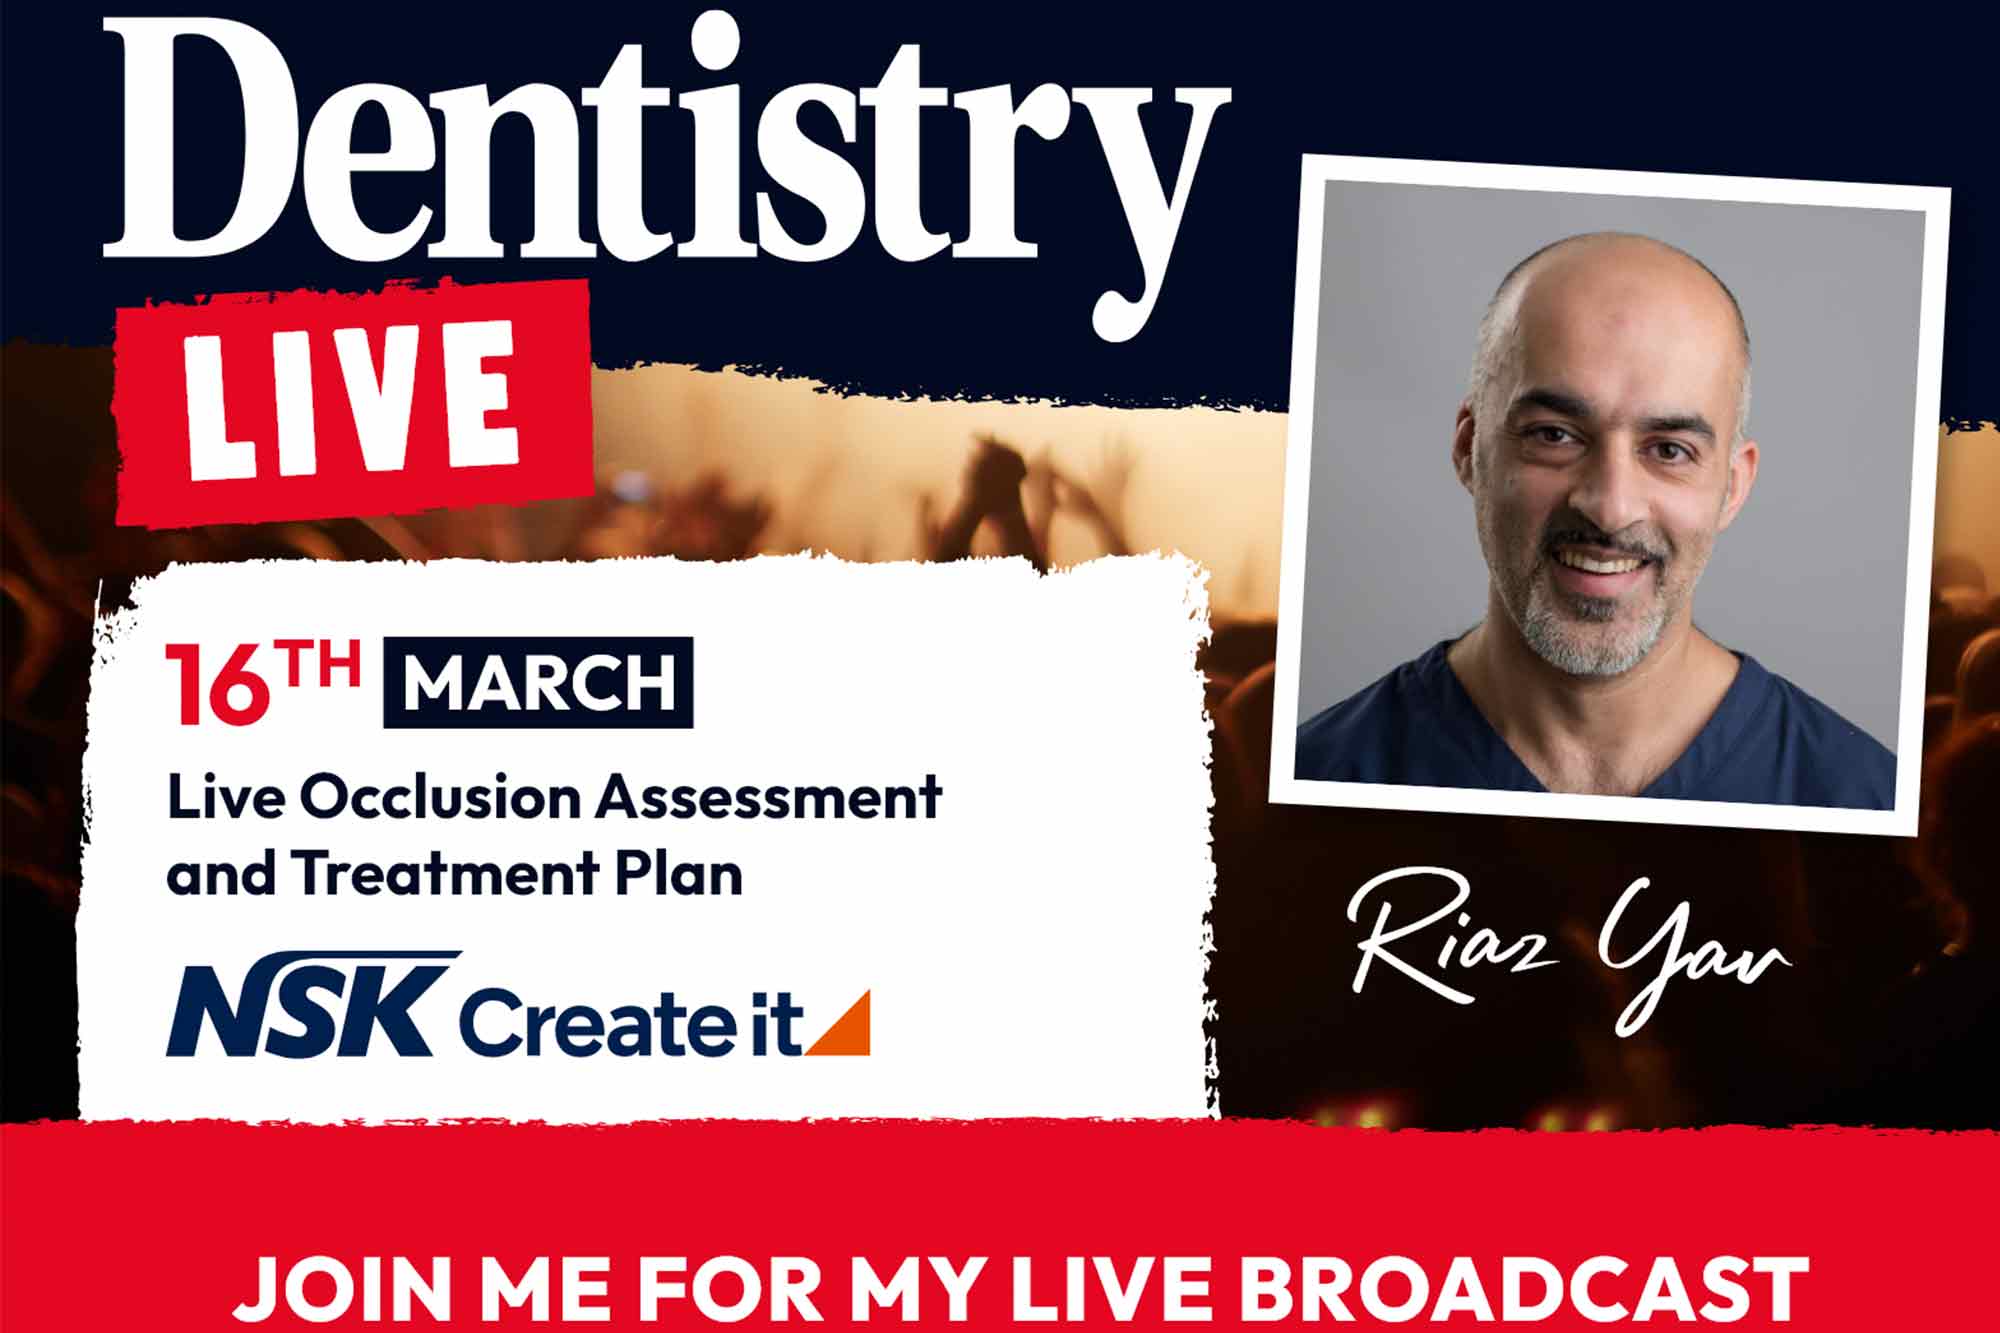 Dentistry Live – sign up now to watch live-streamed dental surgeries